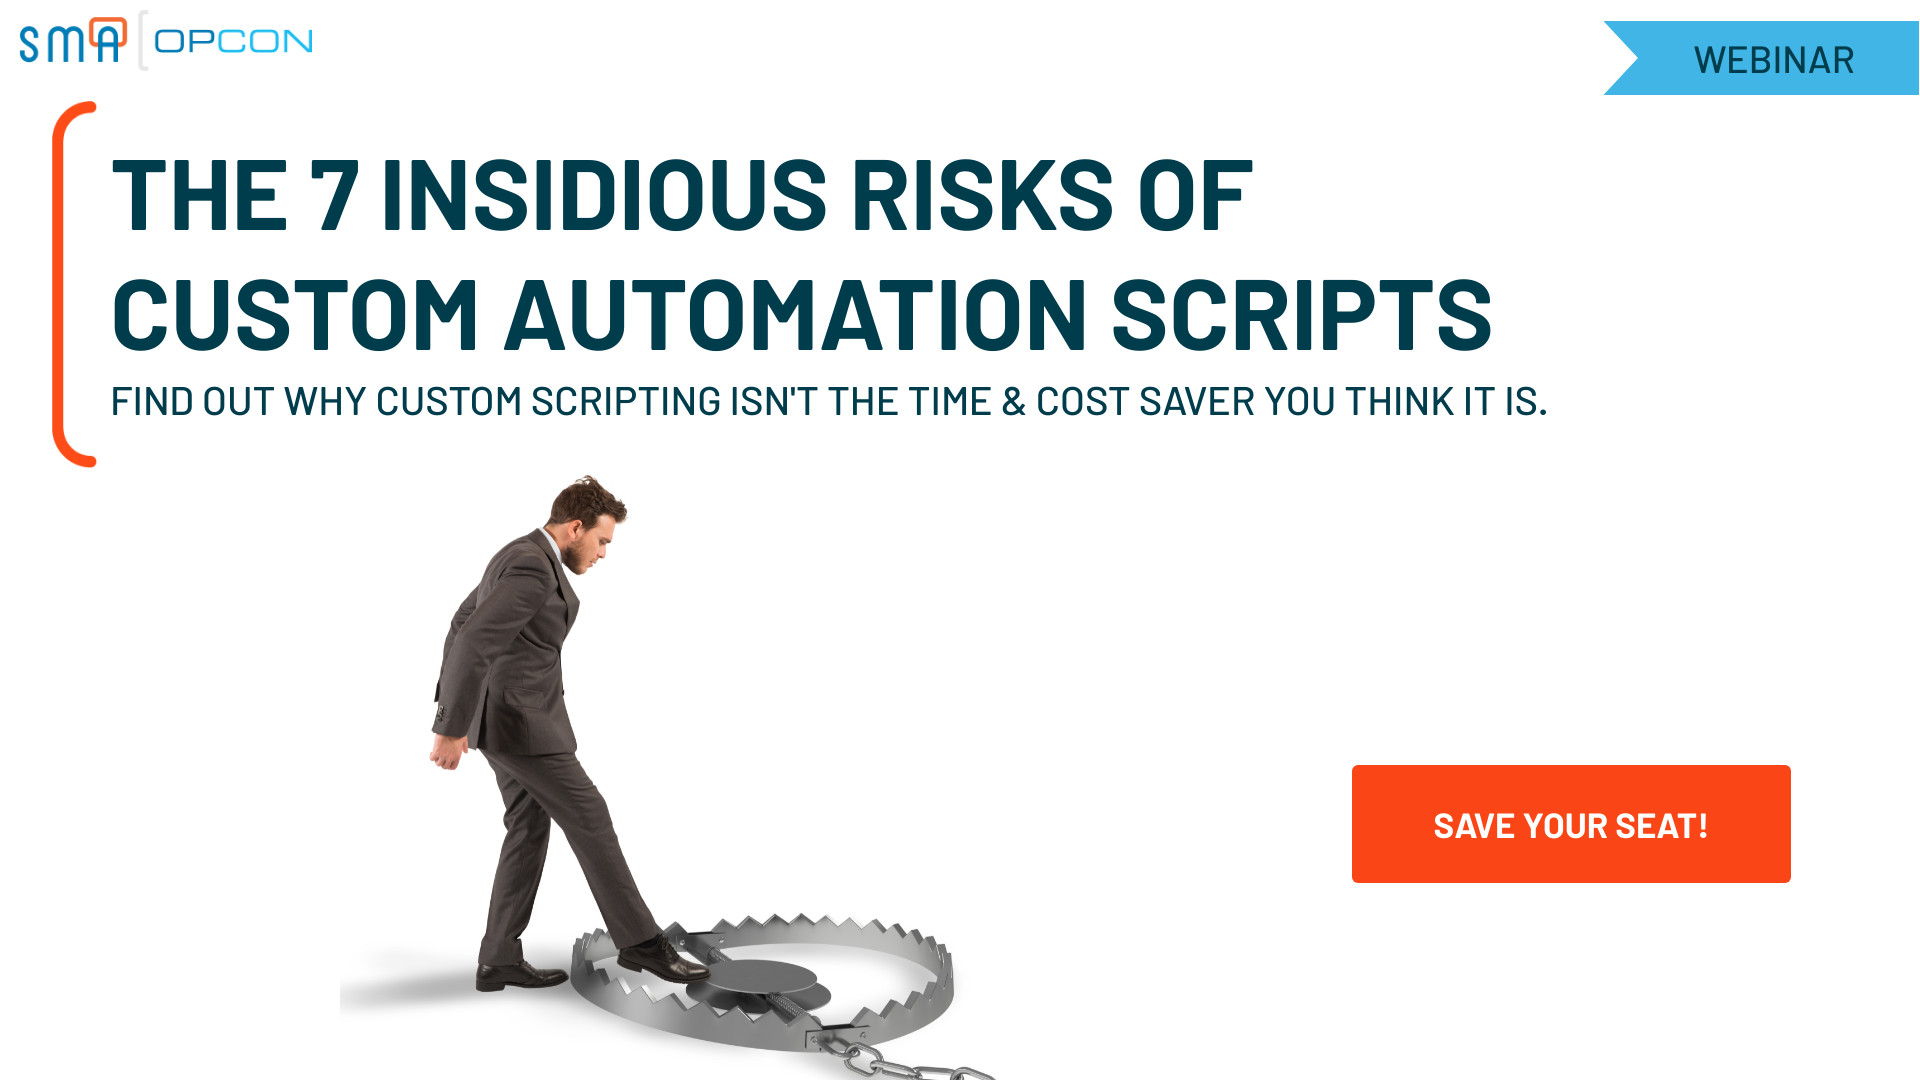 Save Your Seat Webinar The 7 Insidious Risks of Custom Automation Scripts